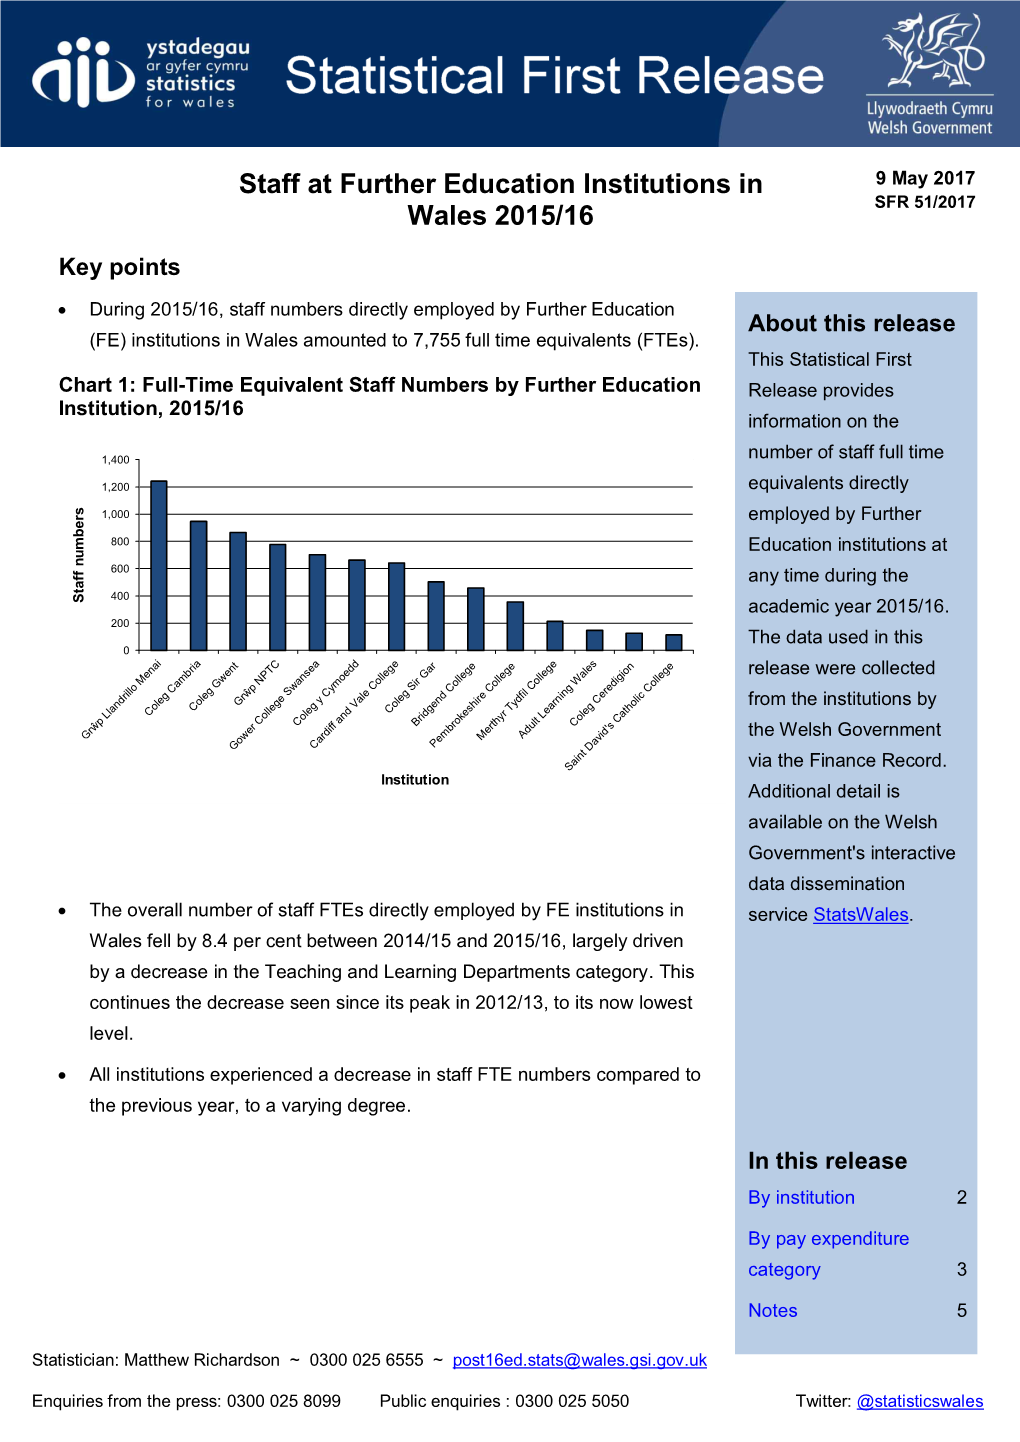 Staff at Further Education Institutions in Wales 2015/16